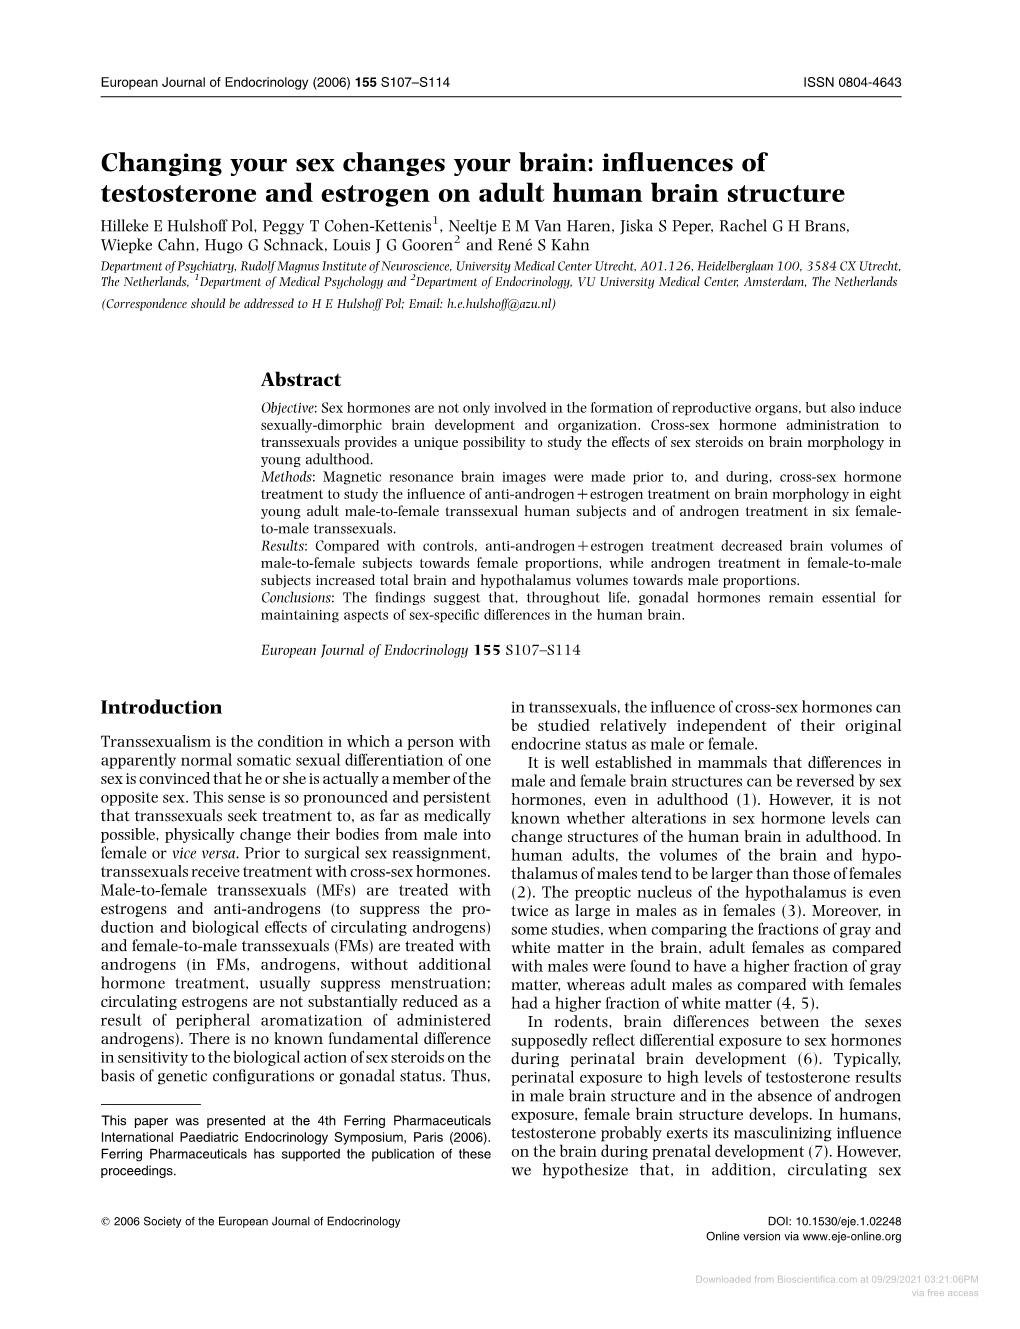 Influences of Testosterone and Estrogen on Adult Human Brain